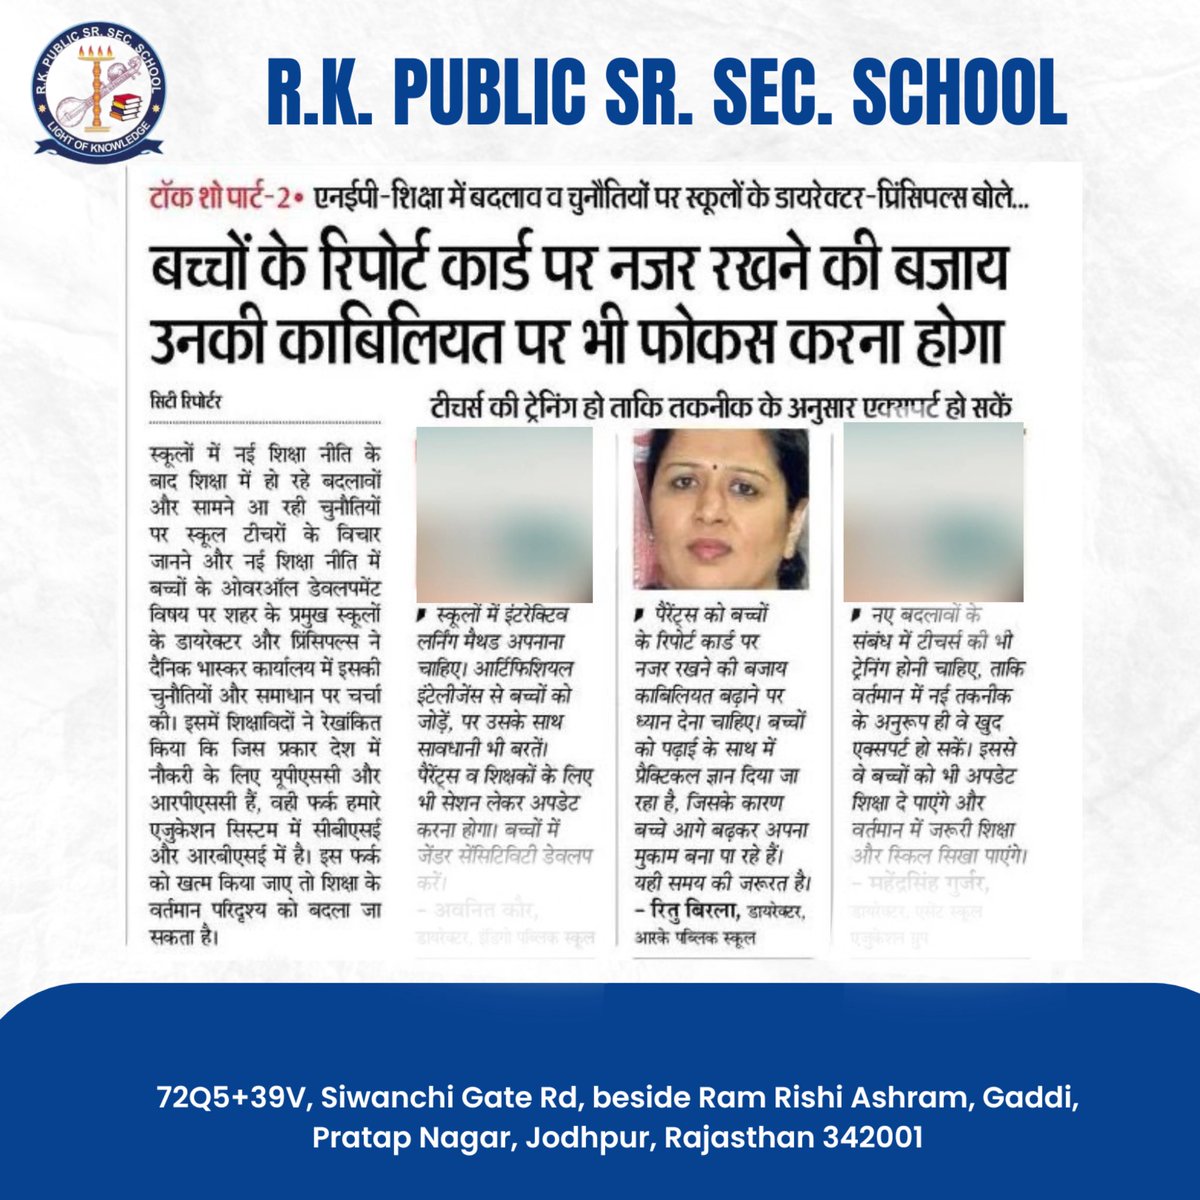 News Coverage 🌟 R.K. Public Sr. Sec. School.
Admissions open 2024-2025

Contact : 9521111514
Email : rkpsjodhpur@gmail.com

#education  #rkpublicschool  #rkpublicschooljodhpur #educationmatters #careercounseling #careergoals #careeropportunities #careermotivation